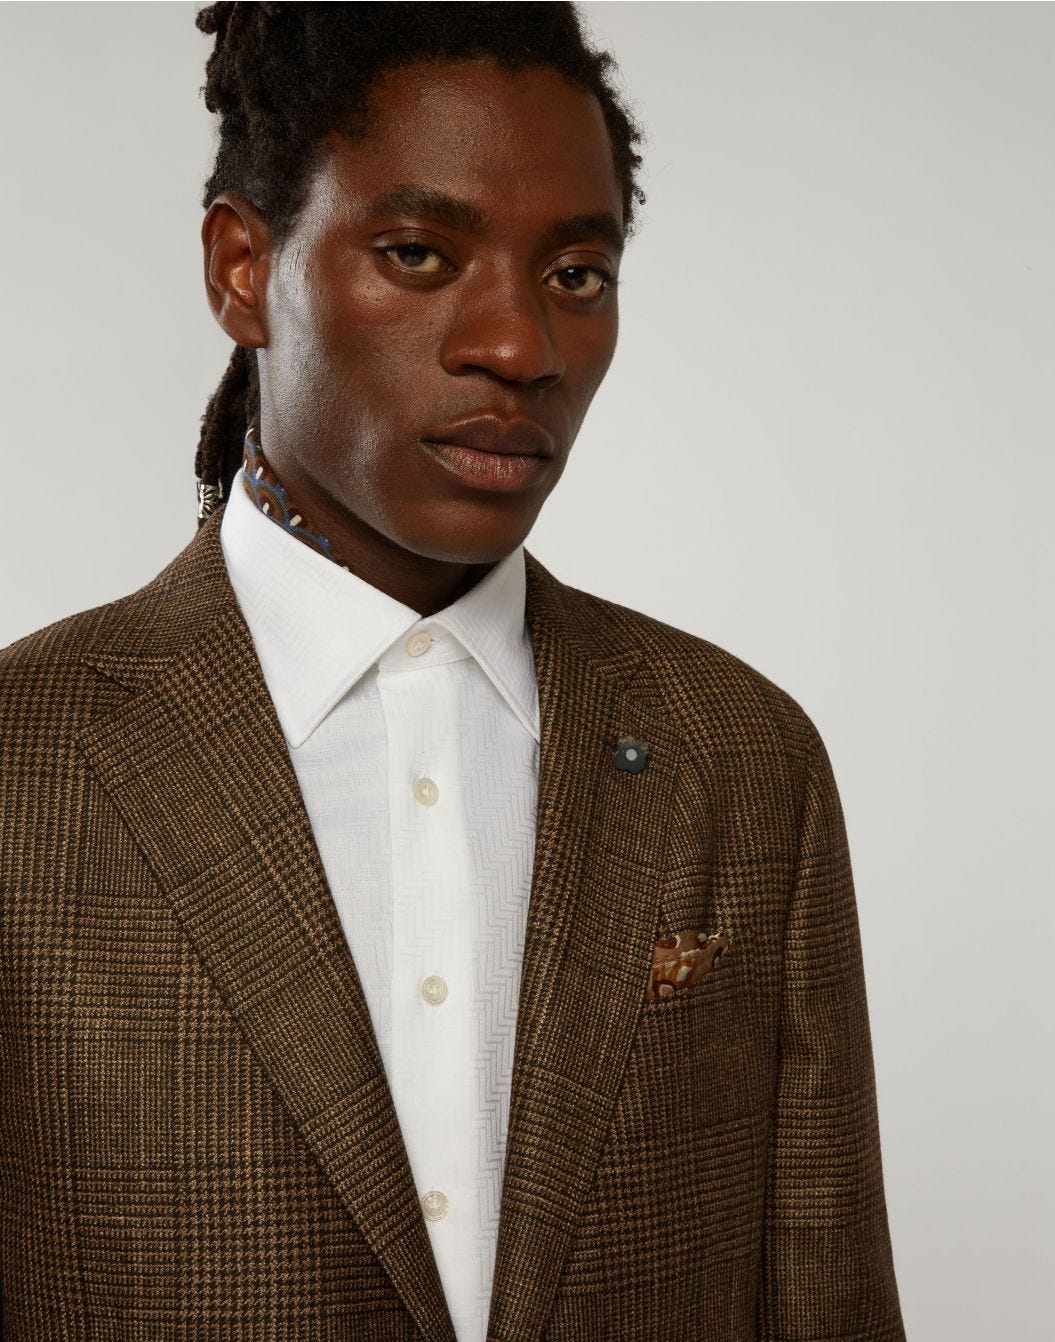 Brown suit in wool and cashmere - Supersoft